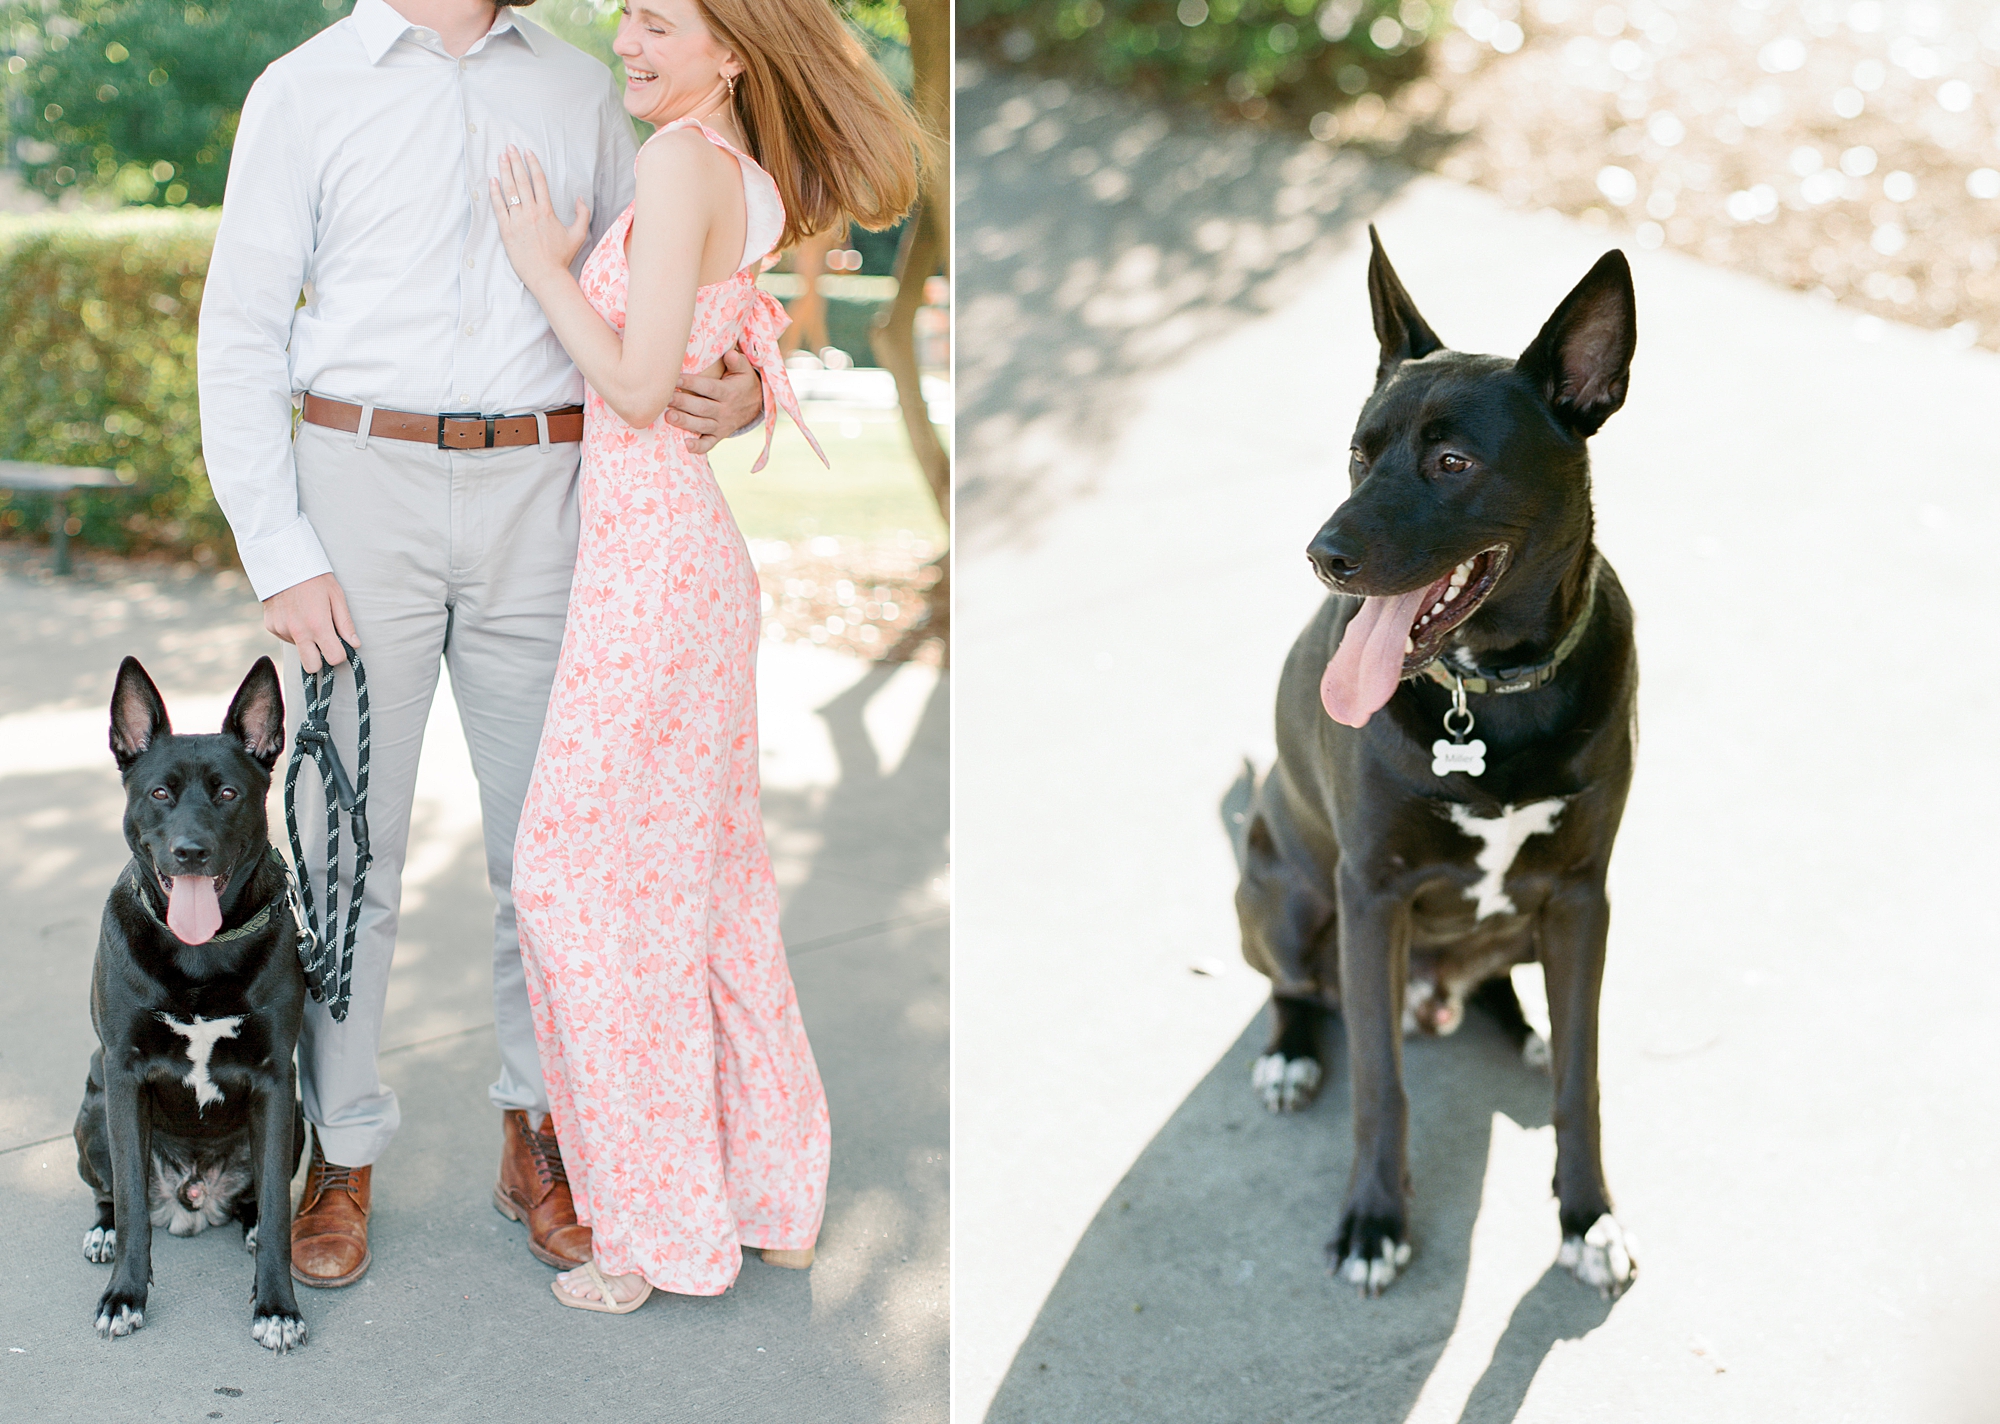 bride and groom hug with dog next to them during Uptown Charlotte engagement session